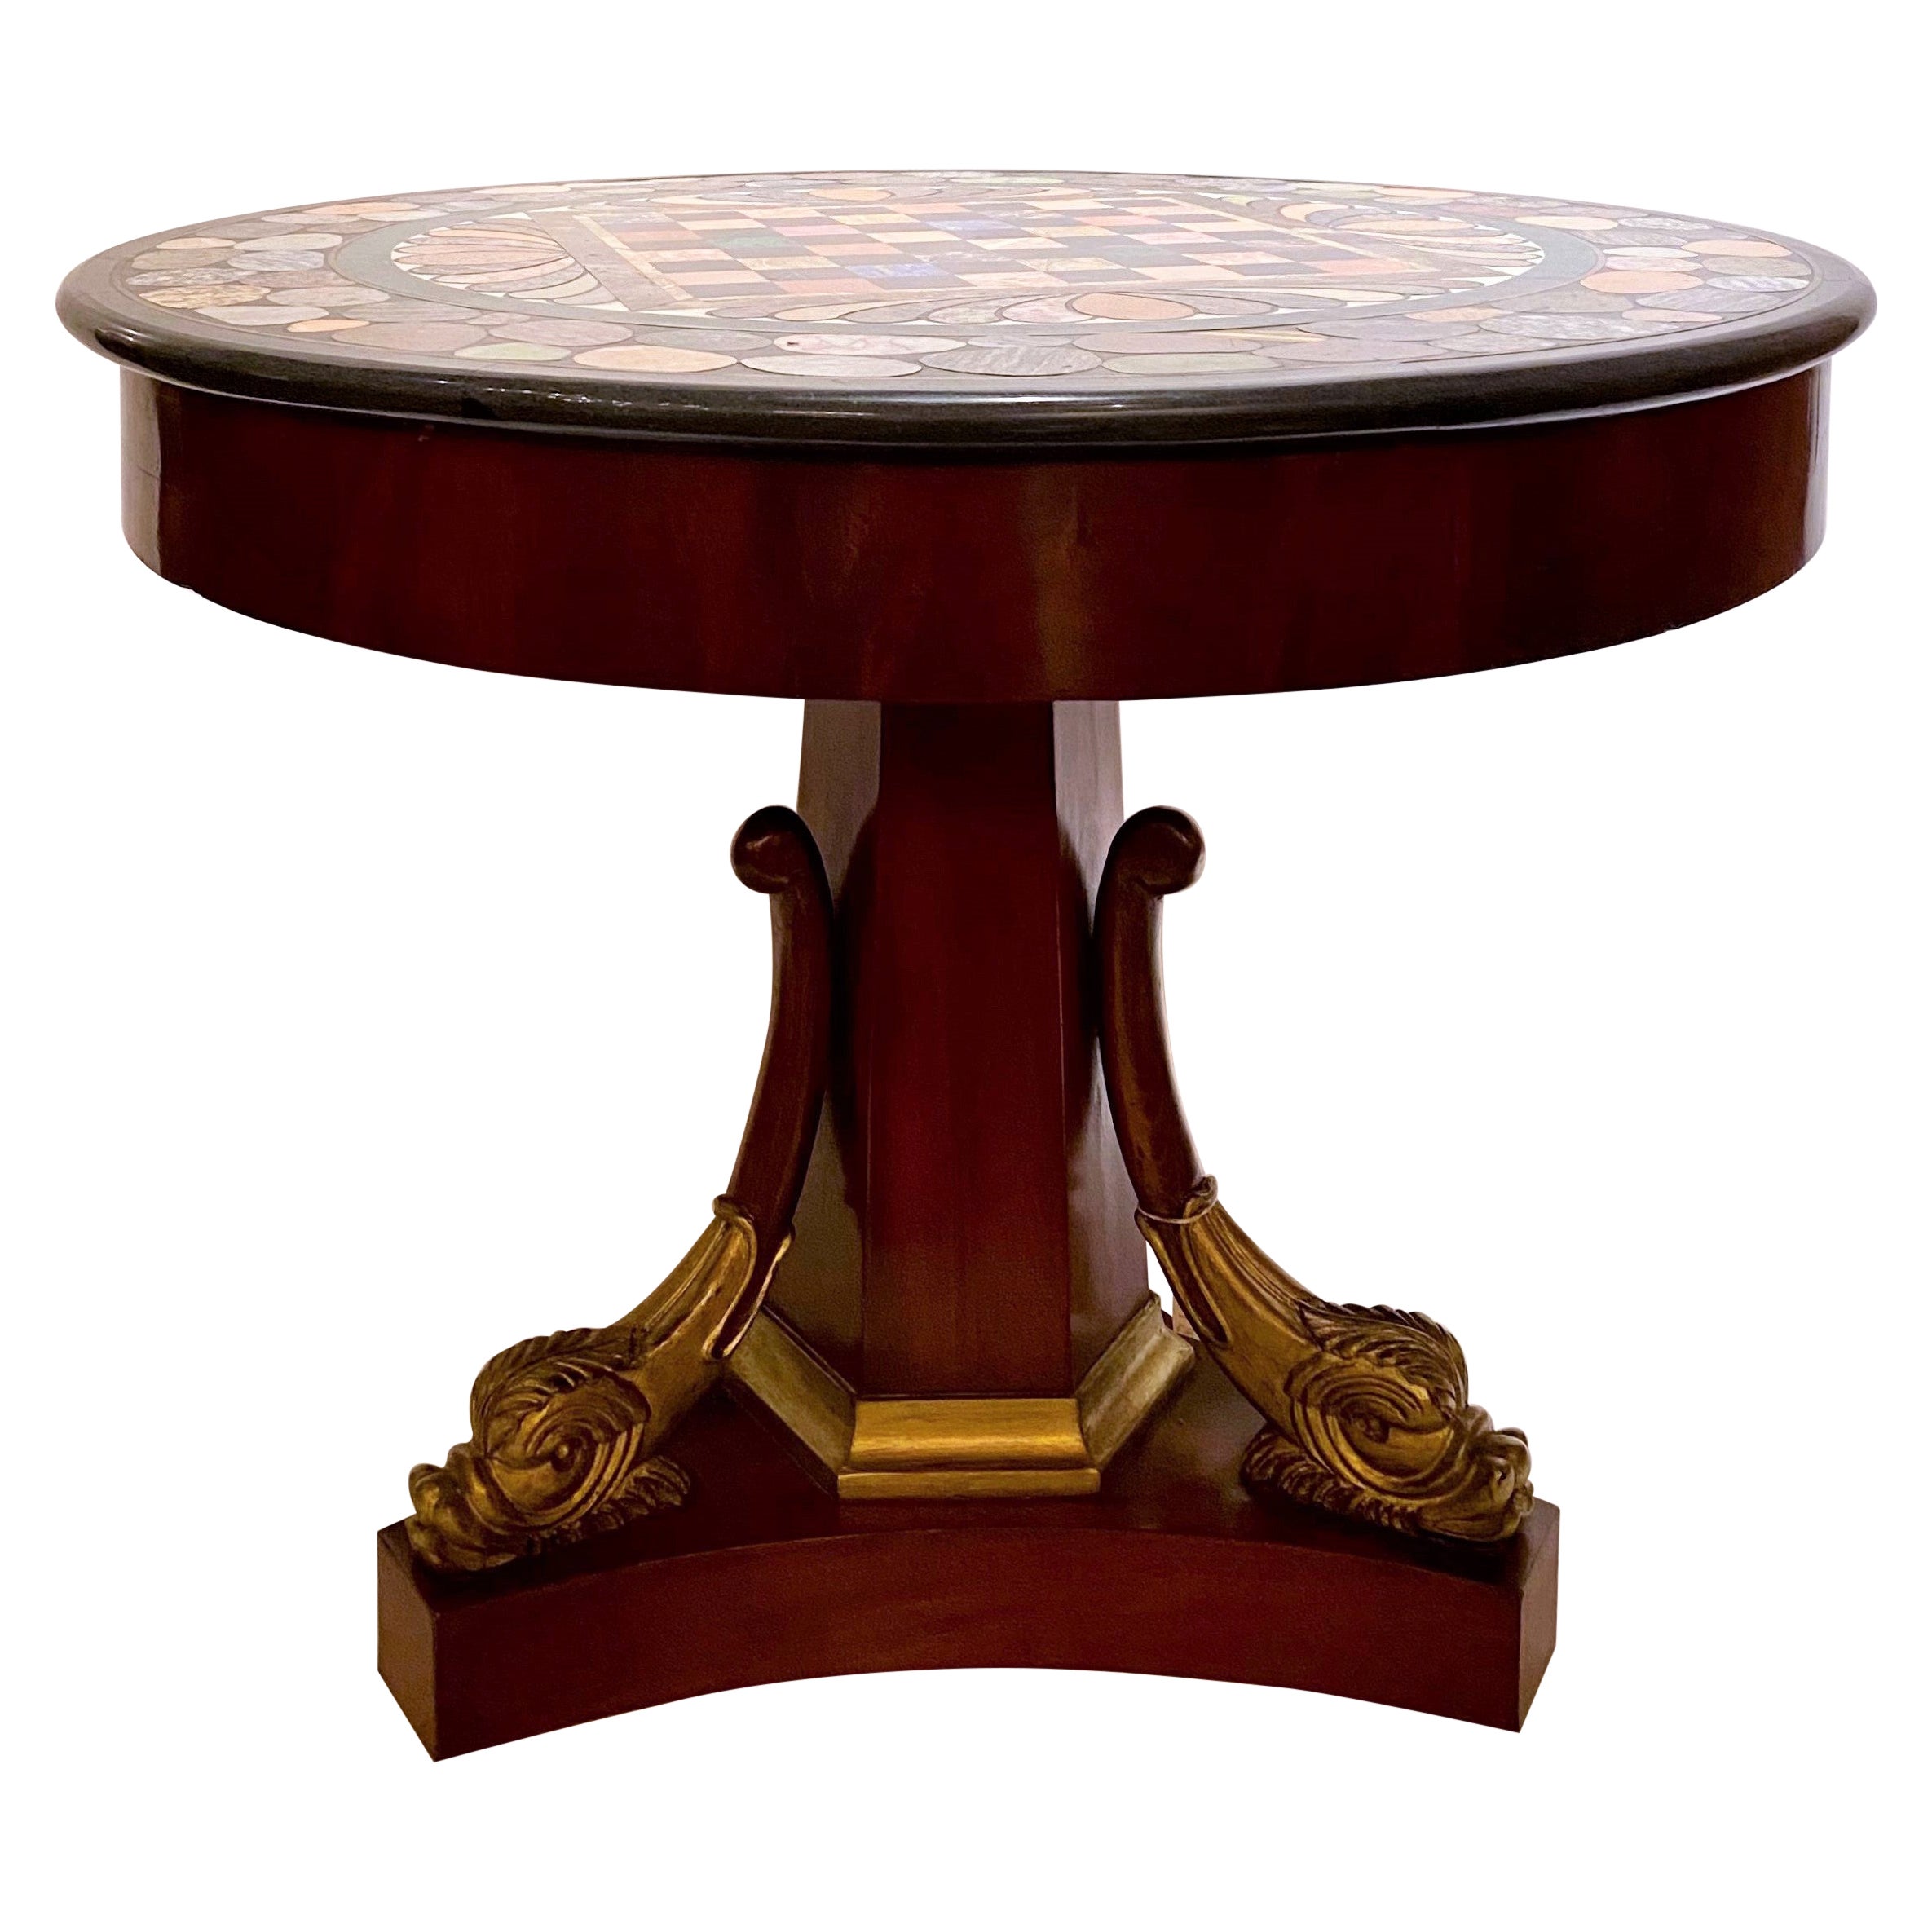 Antique Late 19th Century French Marble-Top Mahogany Round Table w/ Chess Board